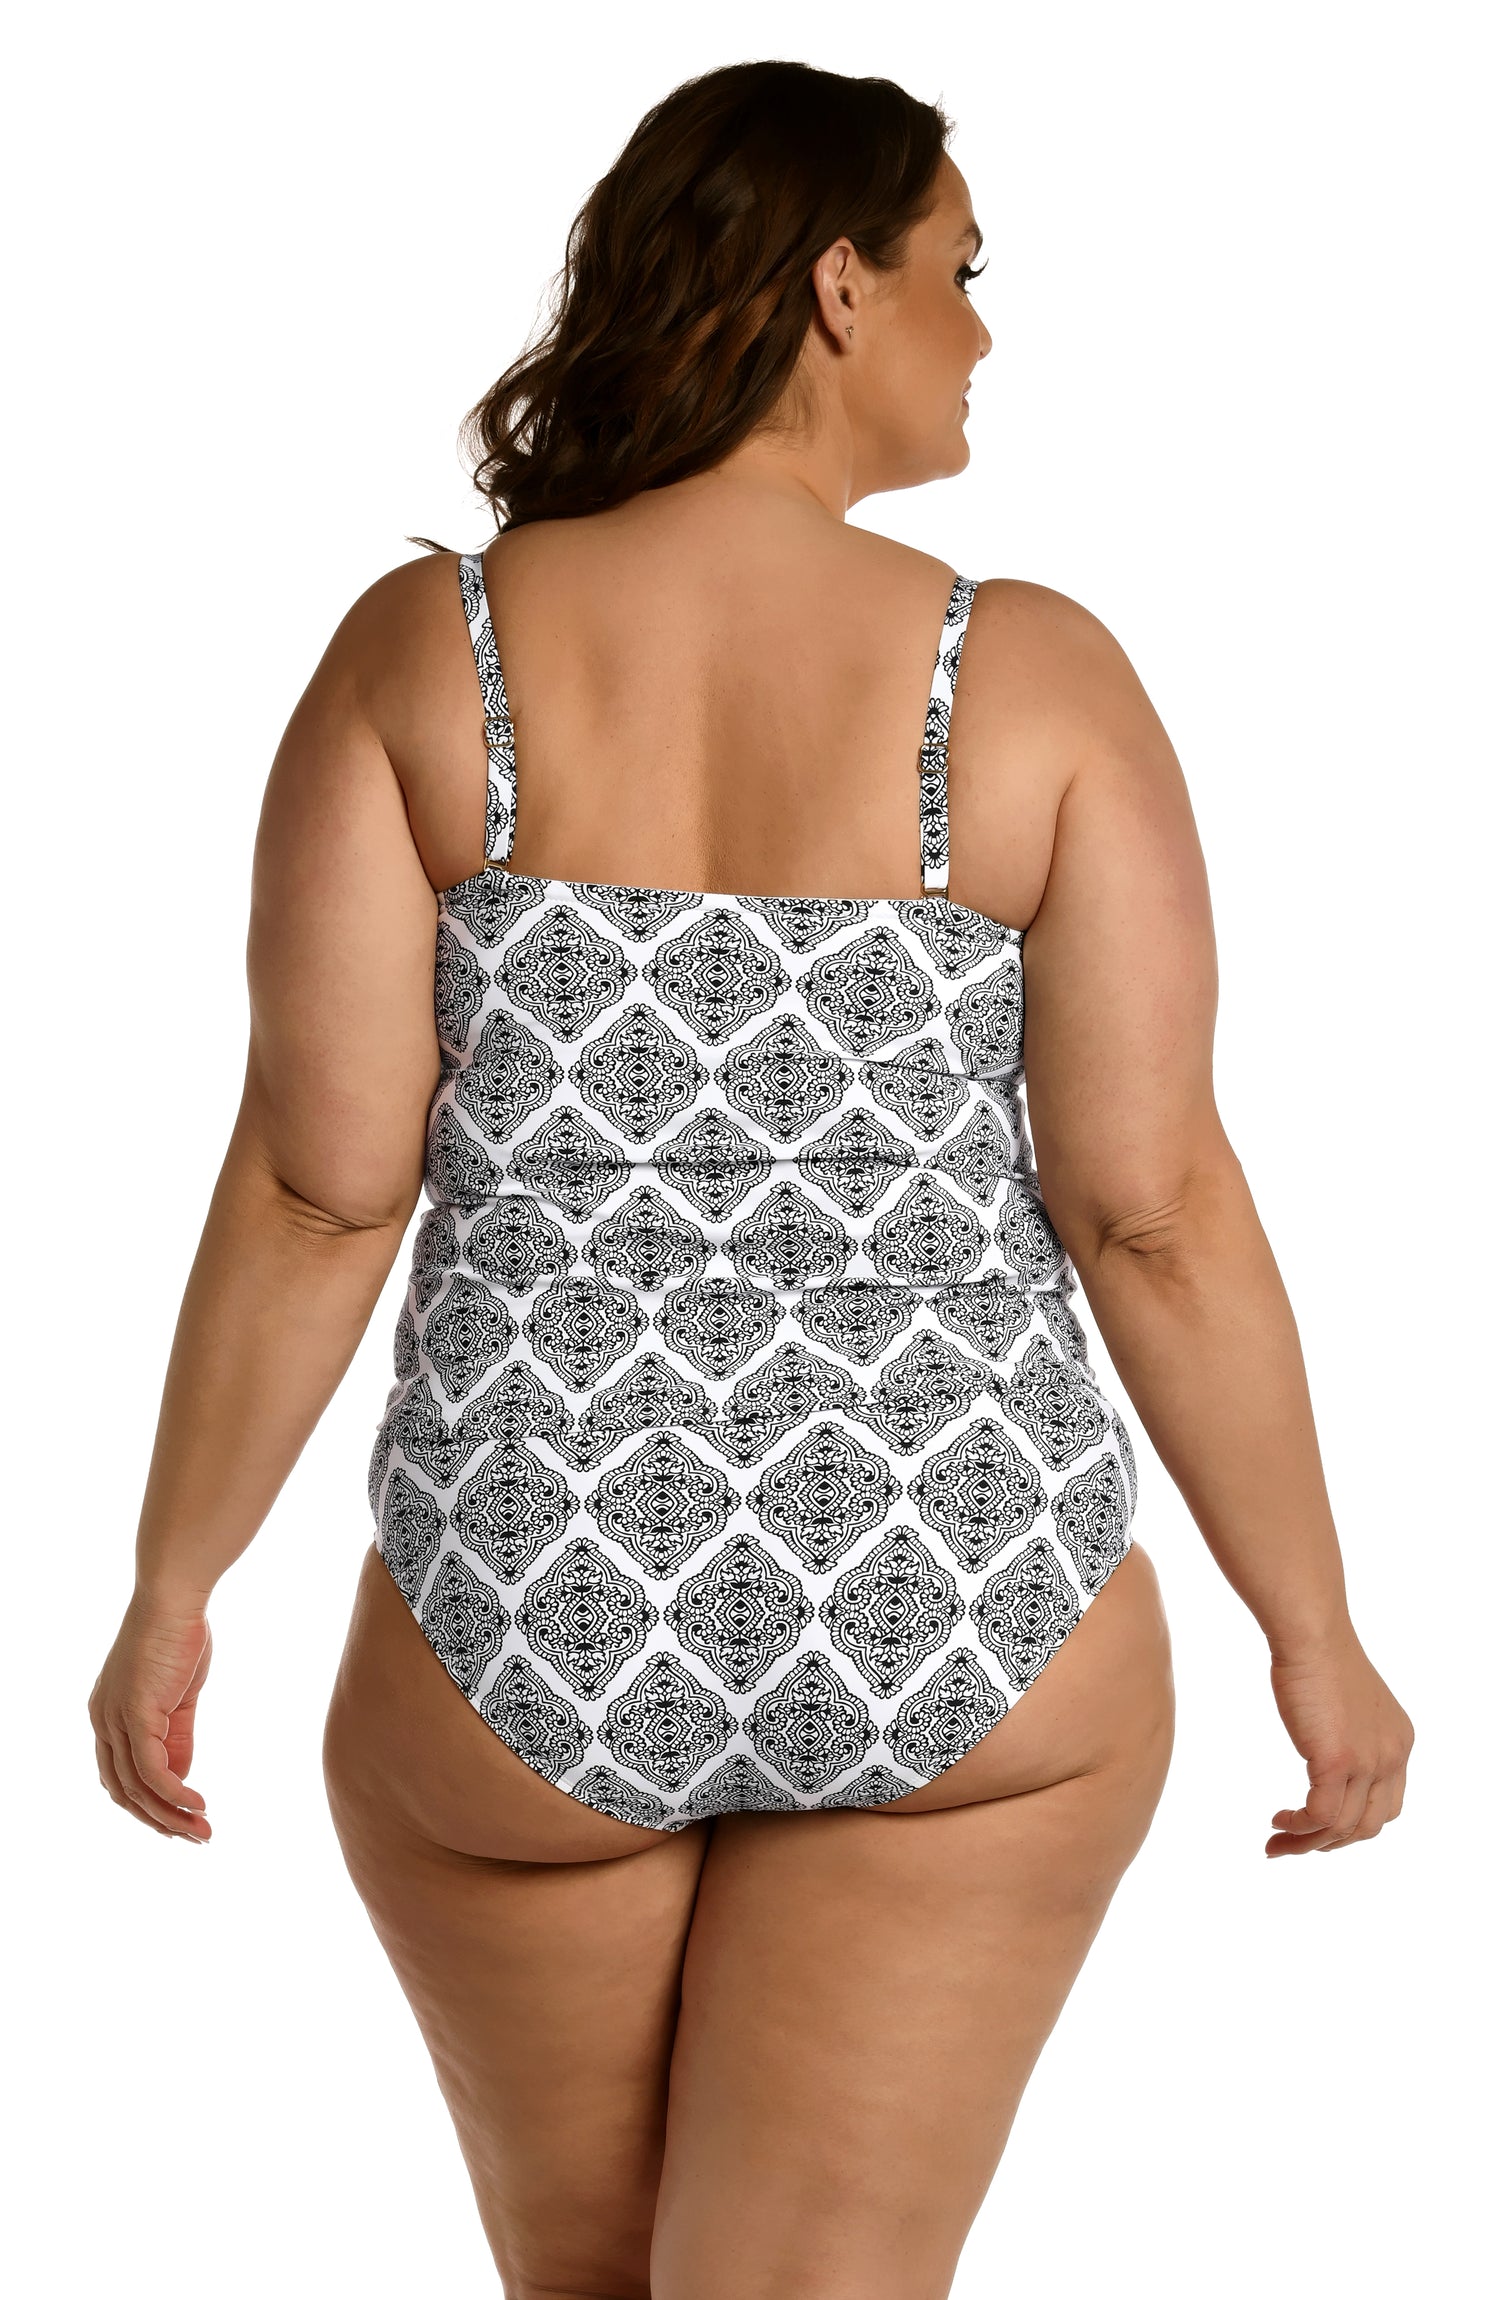 Model is wearing a black and white geometric printed bandeau tankini top from our Oasis Tile collection!